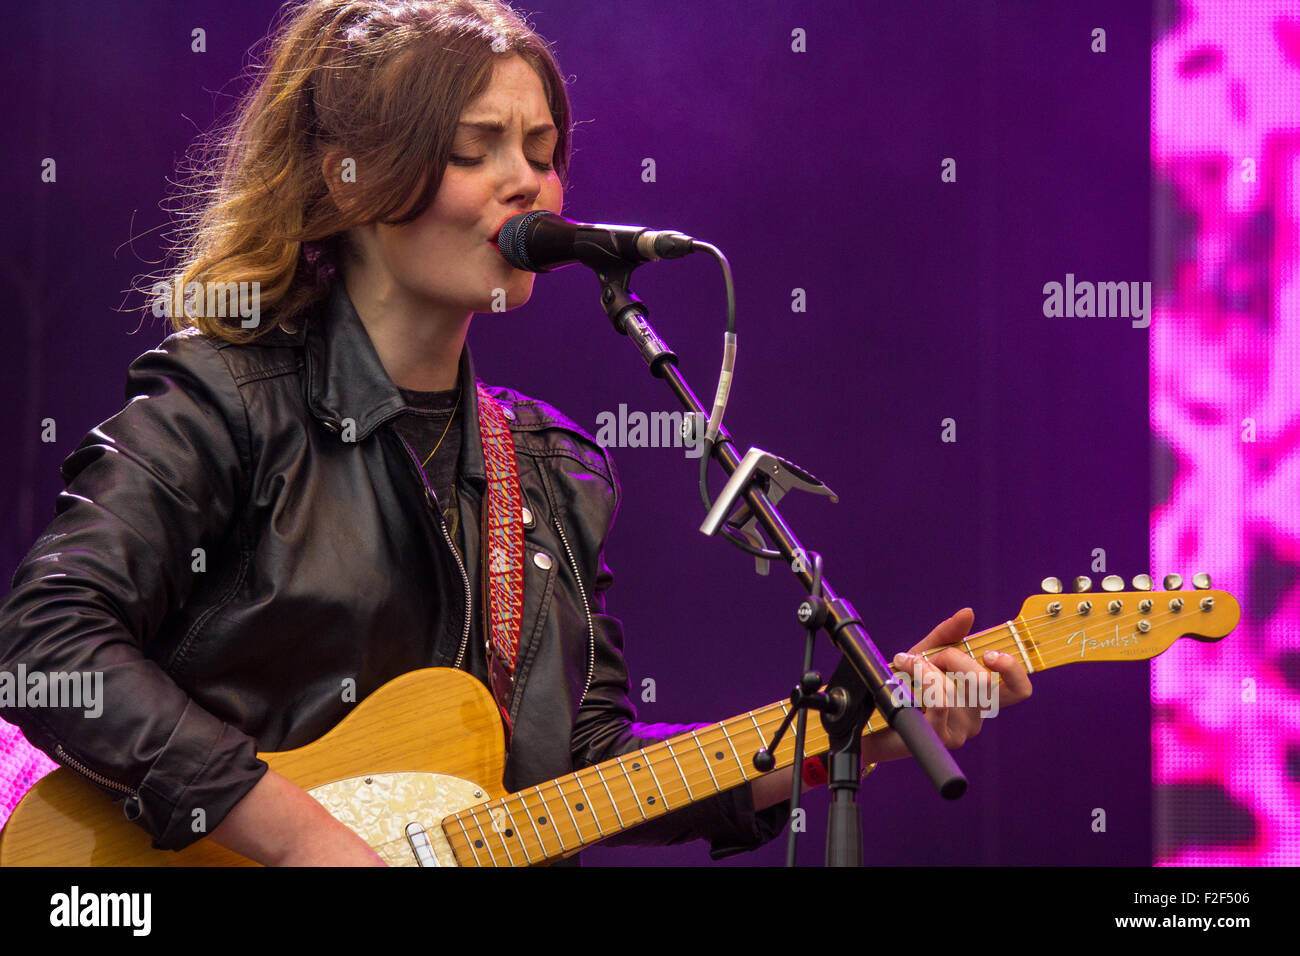 Stina Marie Claire Tweeddale of Honeyblood at Victorious Festival 2015, singing. Stock Photo